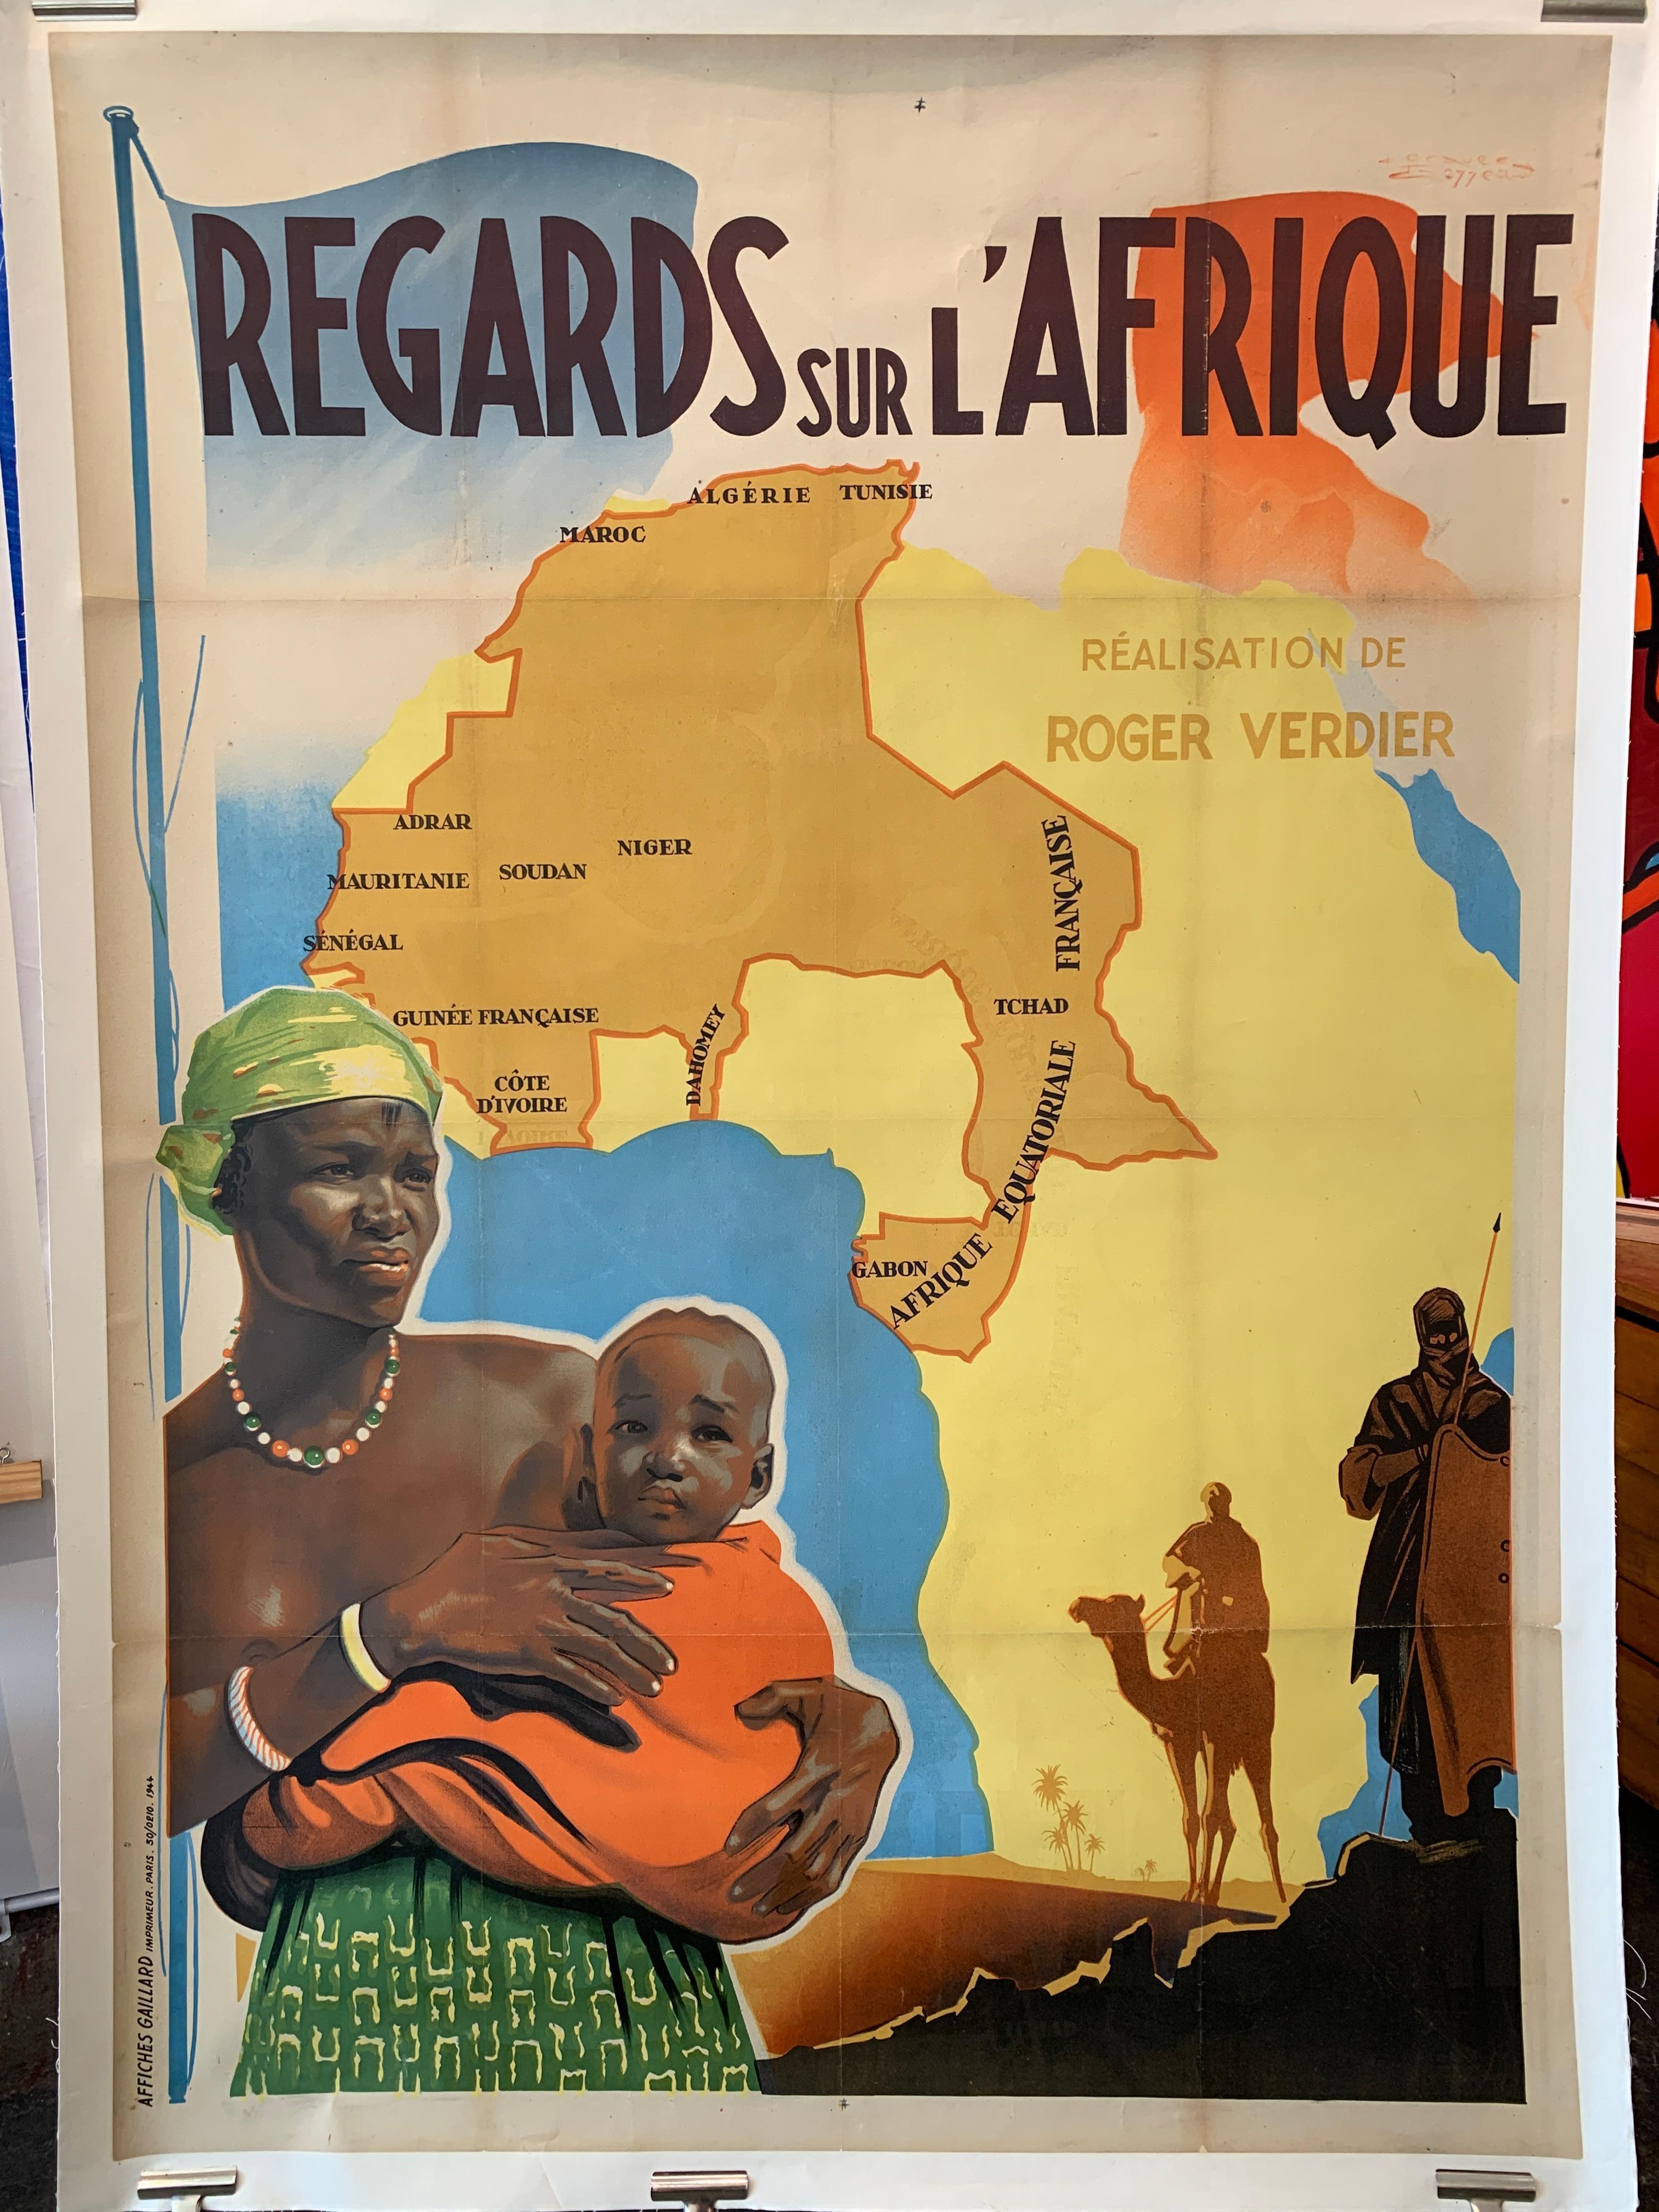 'Regards Sur L'Afrique' Original Vintage Poster by Jacques Bonneaud, 1944

This poster is an original poster from 1944, there are slight signs of age such a fold marks which is consistent with the age of the poster. The overall condition is good,